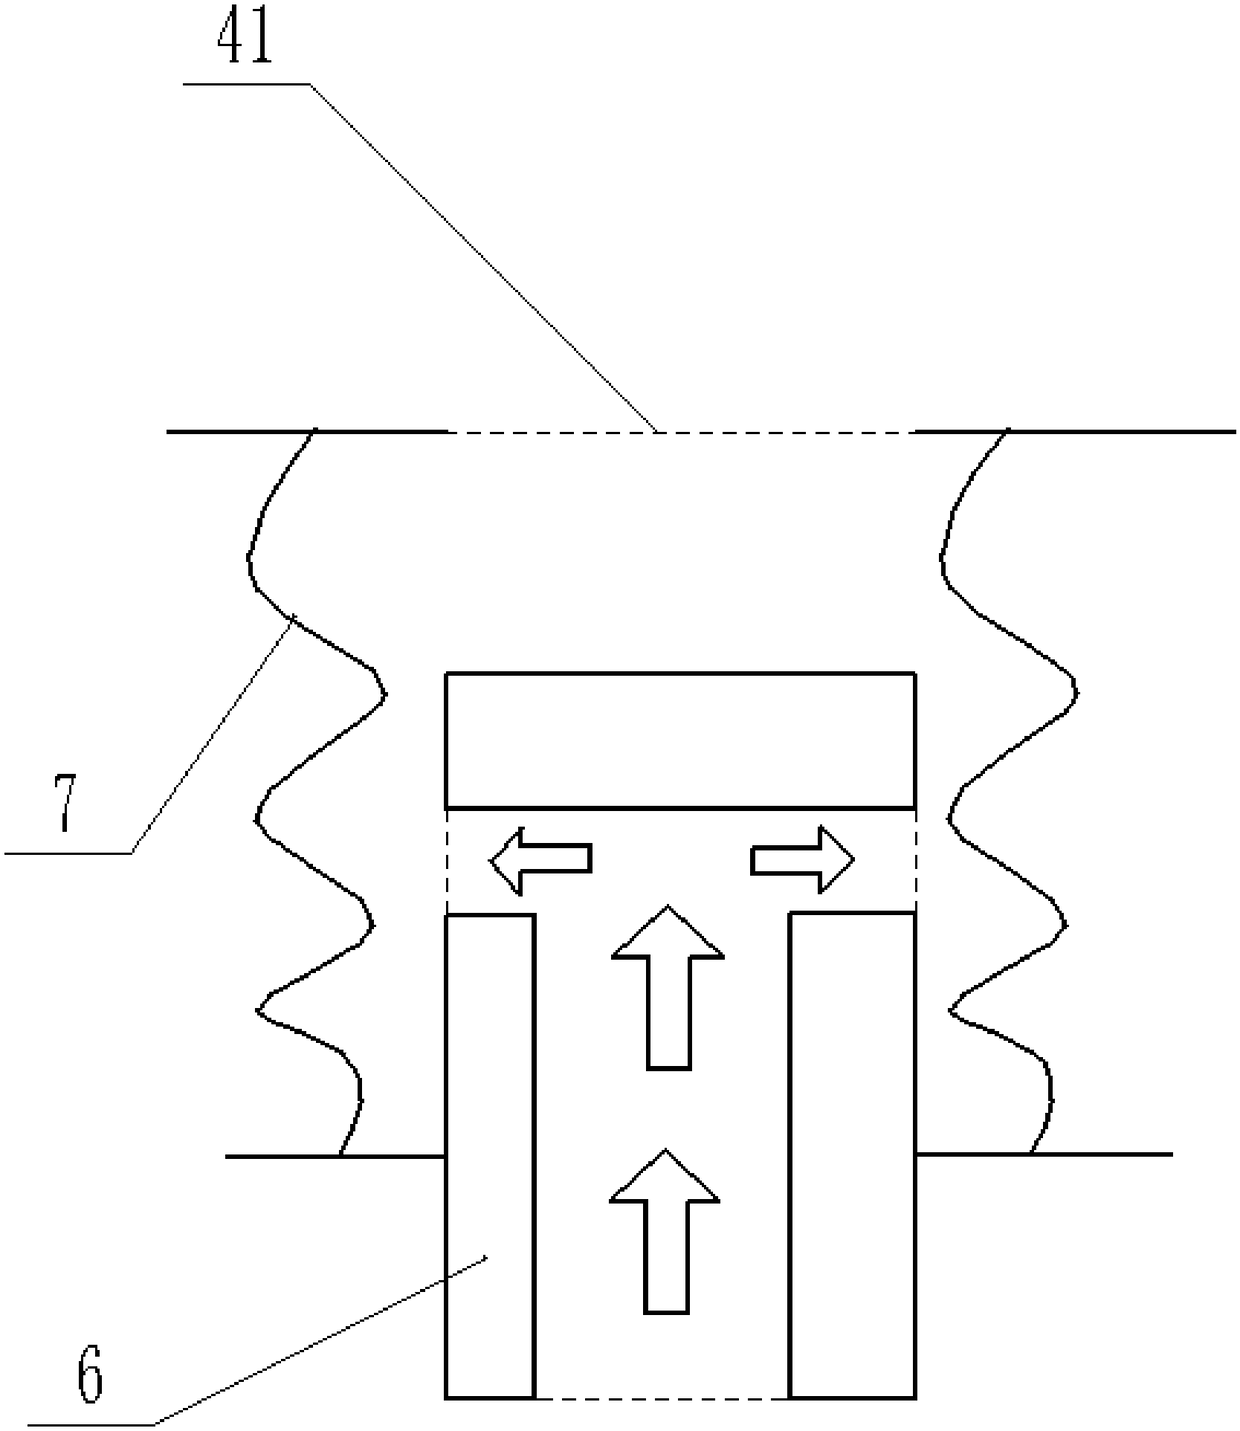 Soil disinfecting and repairing device